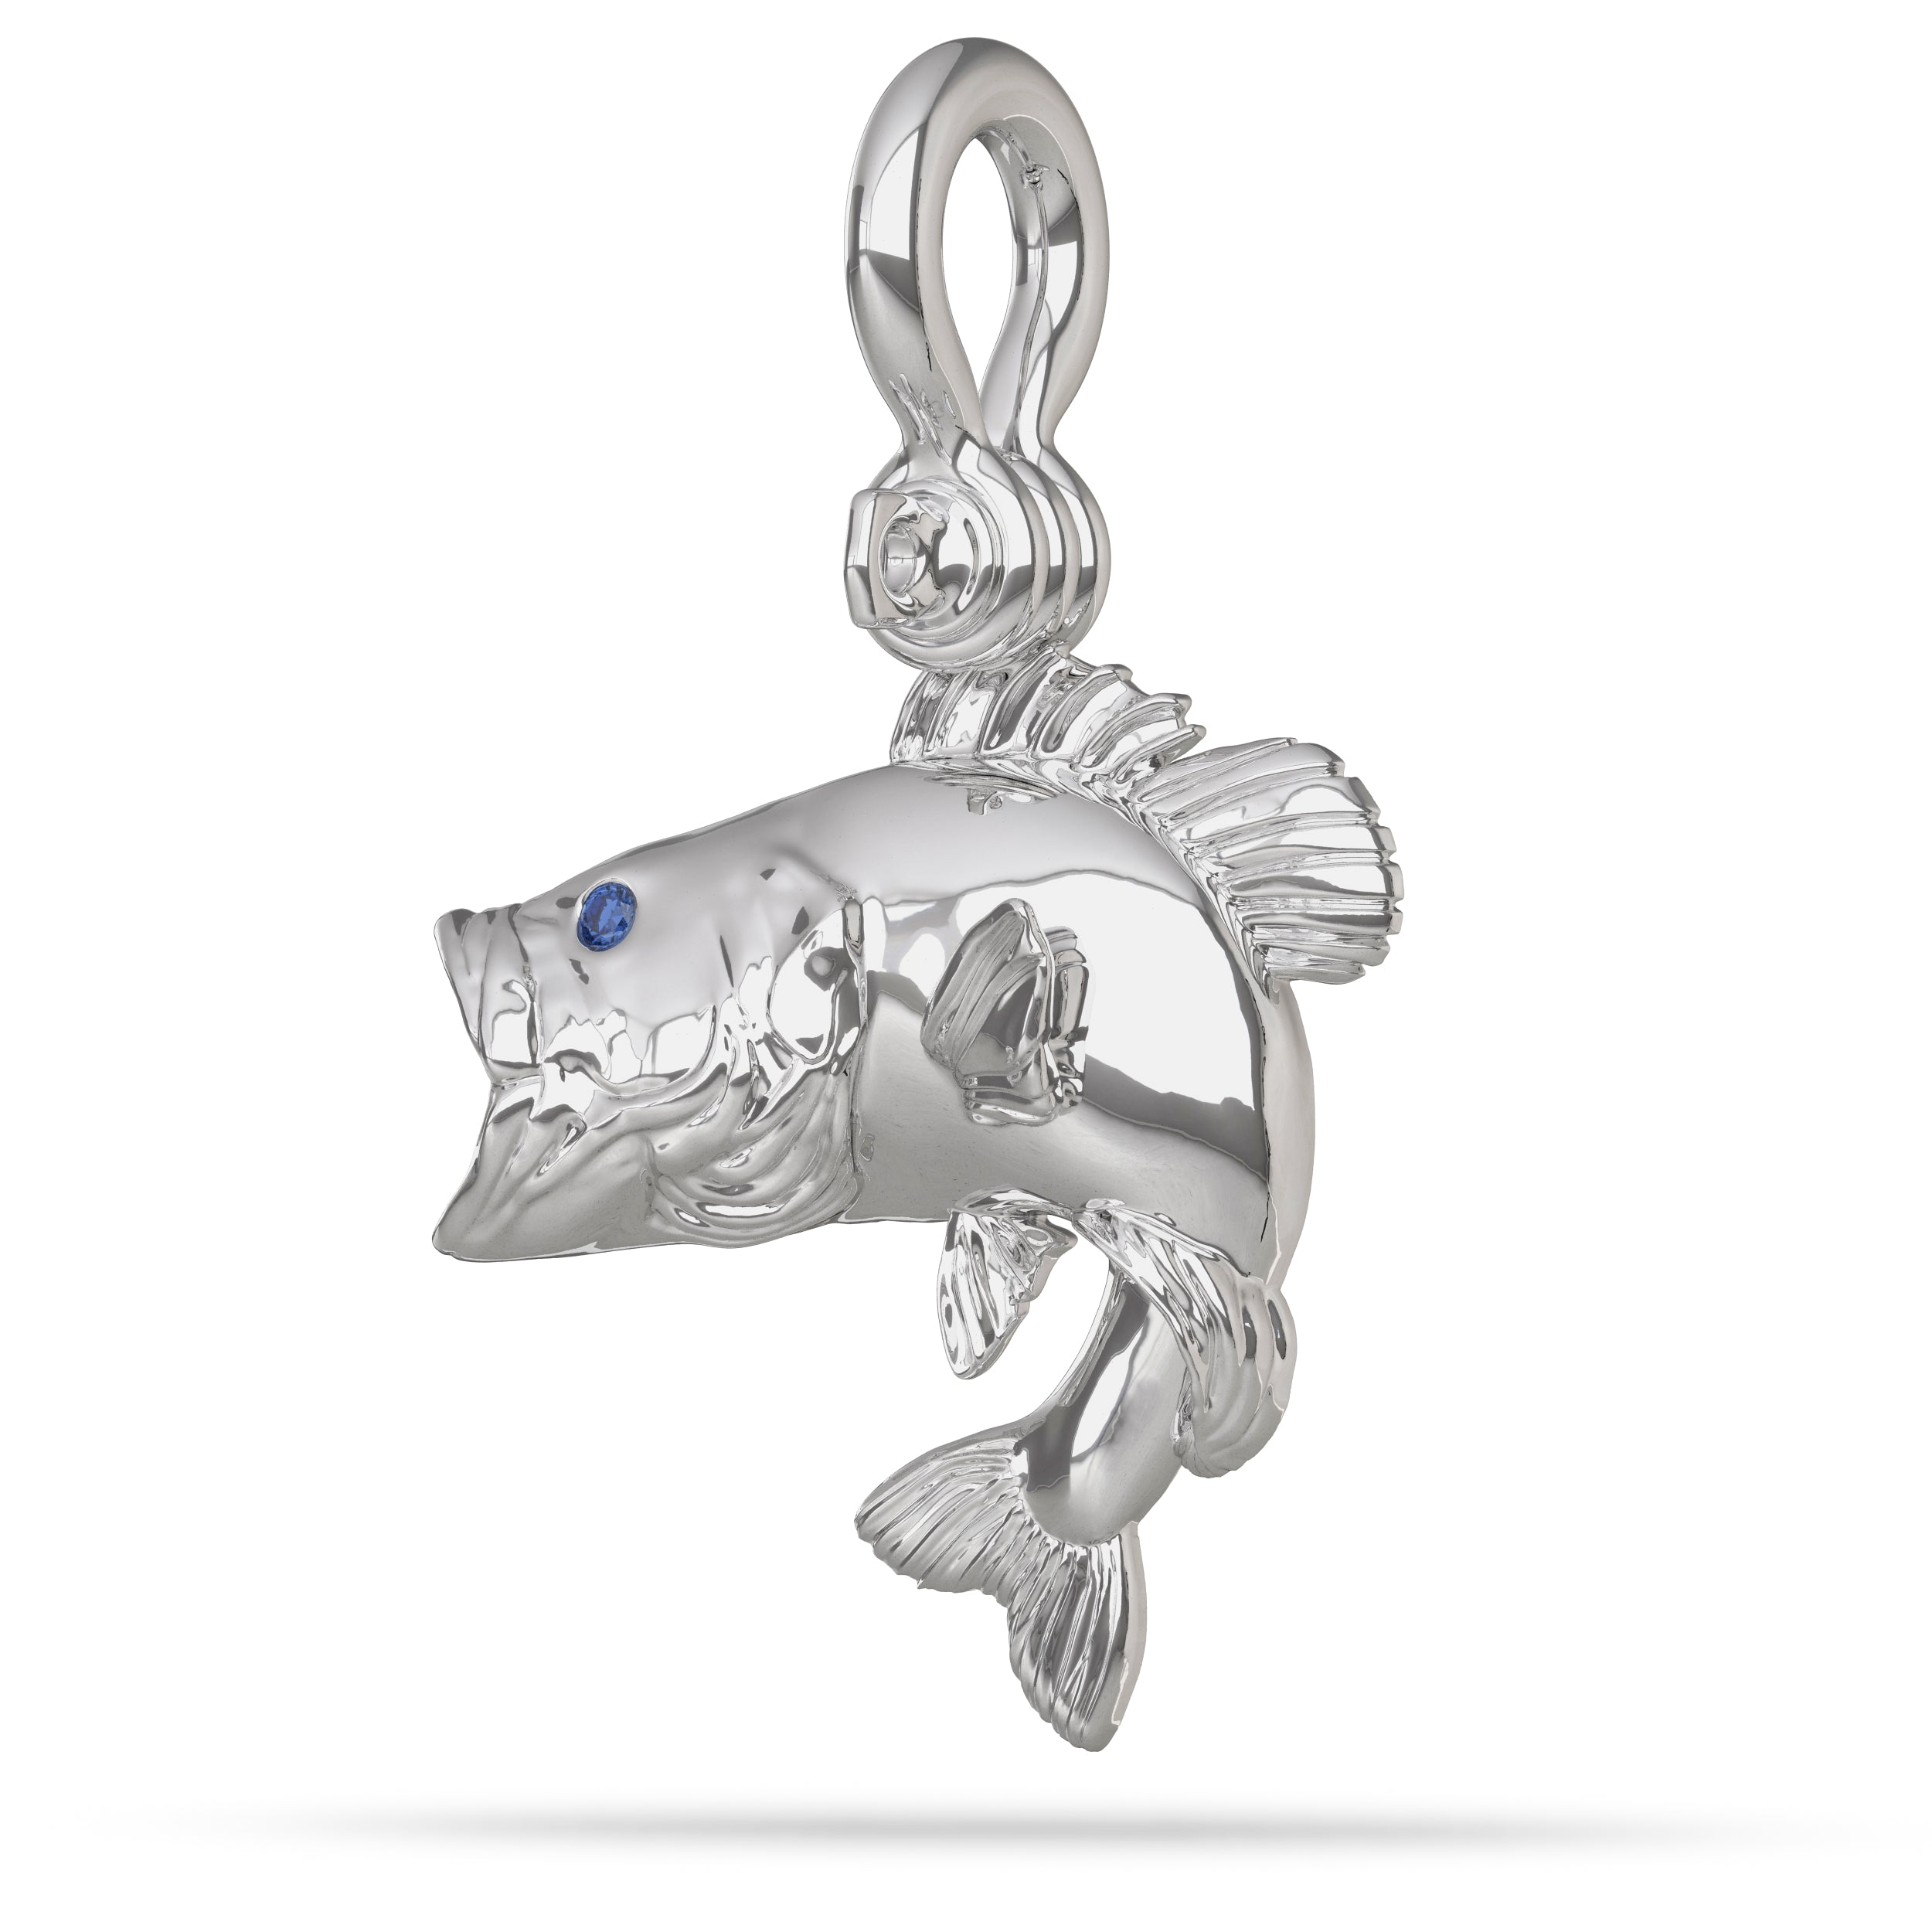 Sterling Silver Largemouth Bass Jumping Pendant with Mouth Open has High Polished Mirror Finish With Blue Sapphire Eyes With A Mariner Style Shackle Bail Custom Designed for Bass Fisherman By Nautical Treasure Jewelry In The Florida Keys